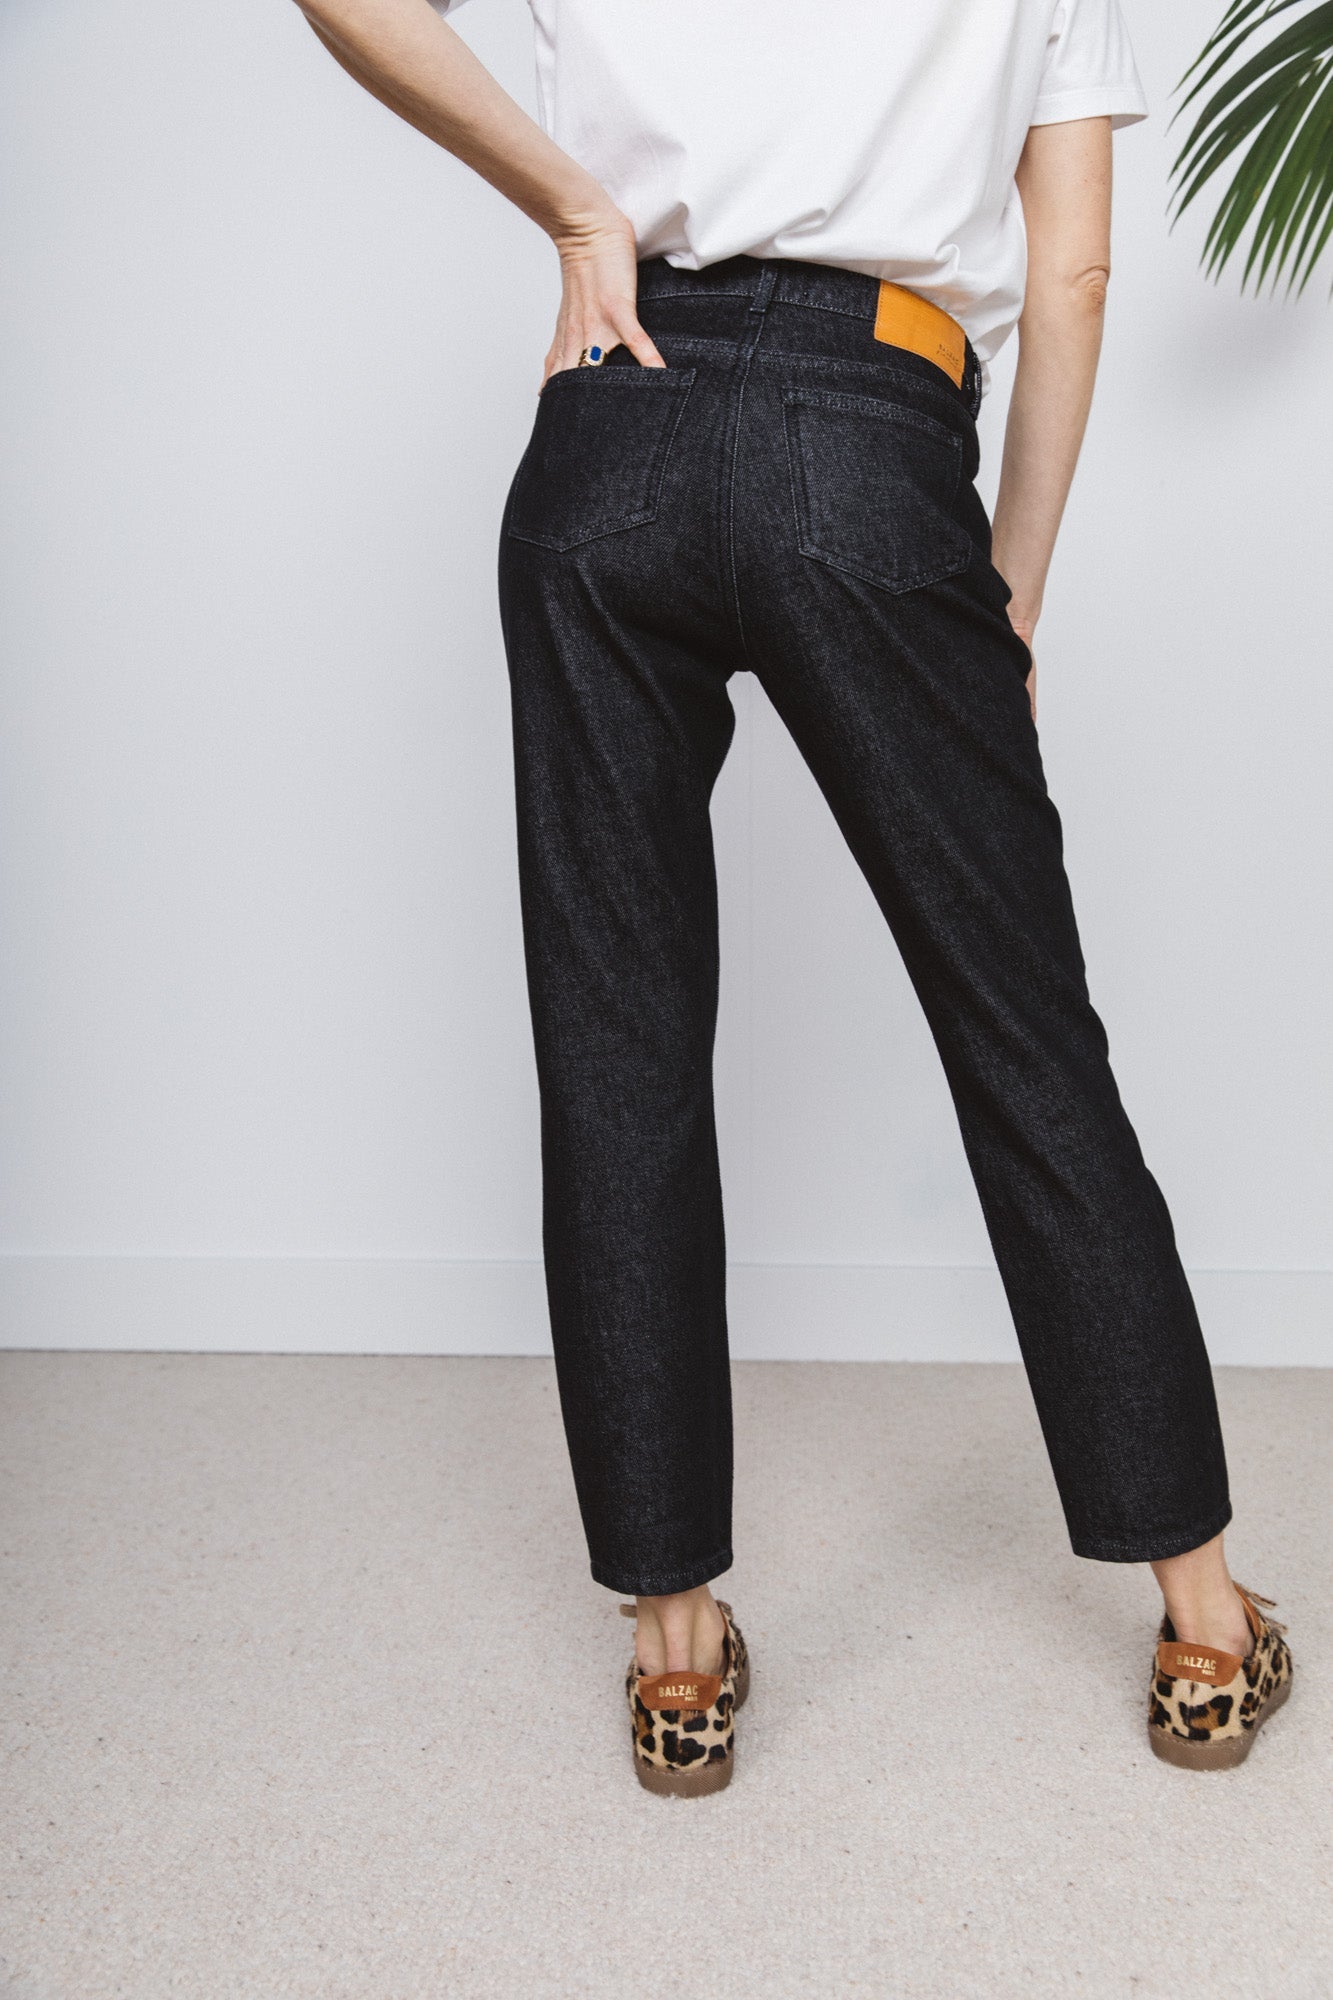 Black jeans, a timeless urban style piece that goes with every color. -  Project X Paris